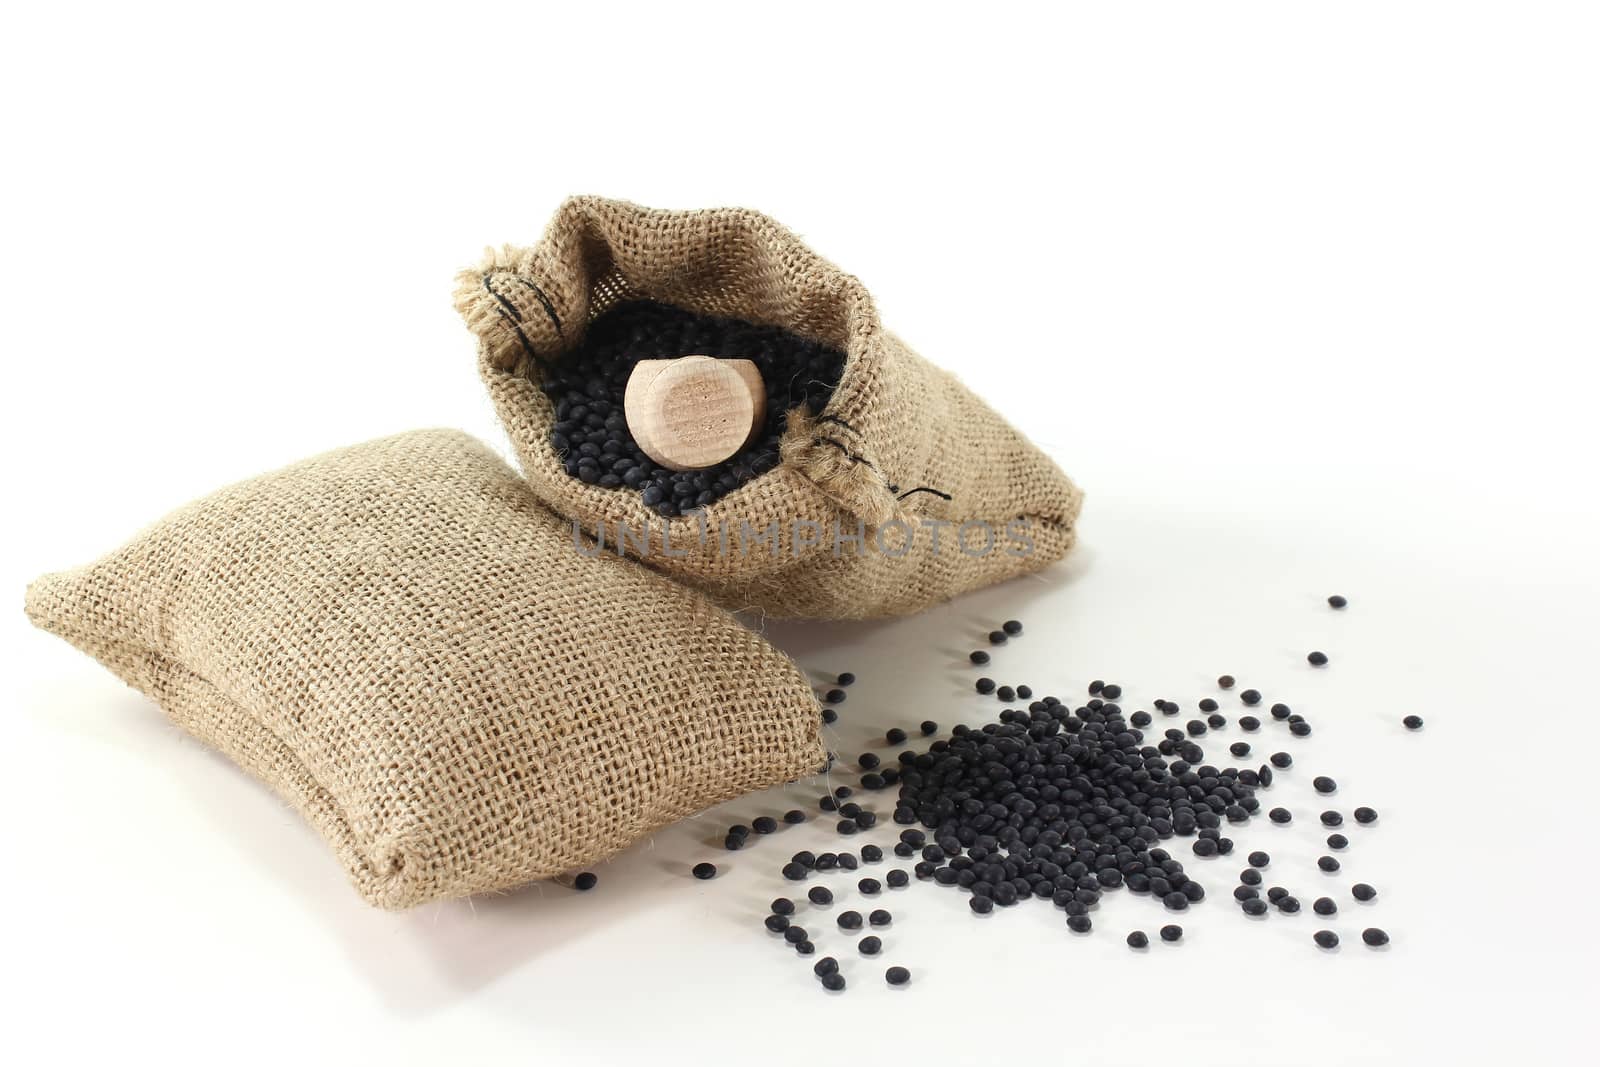 dried Beluga lentils by discovery